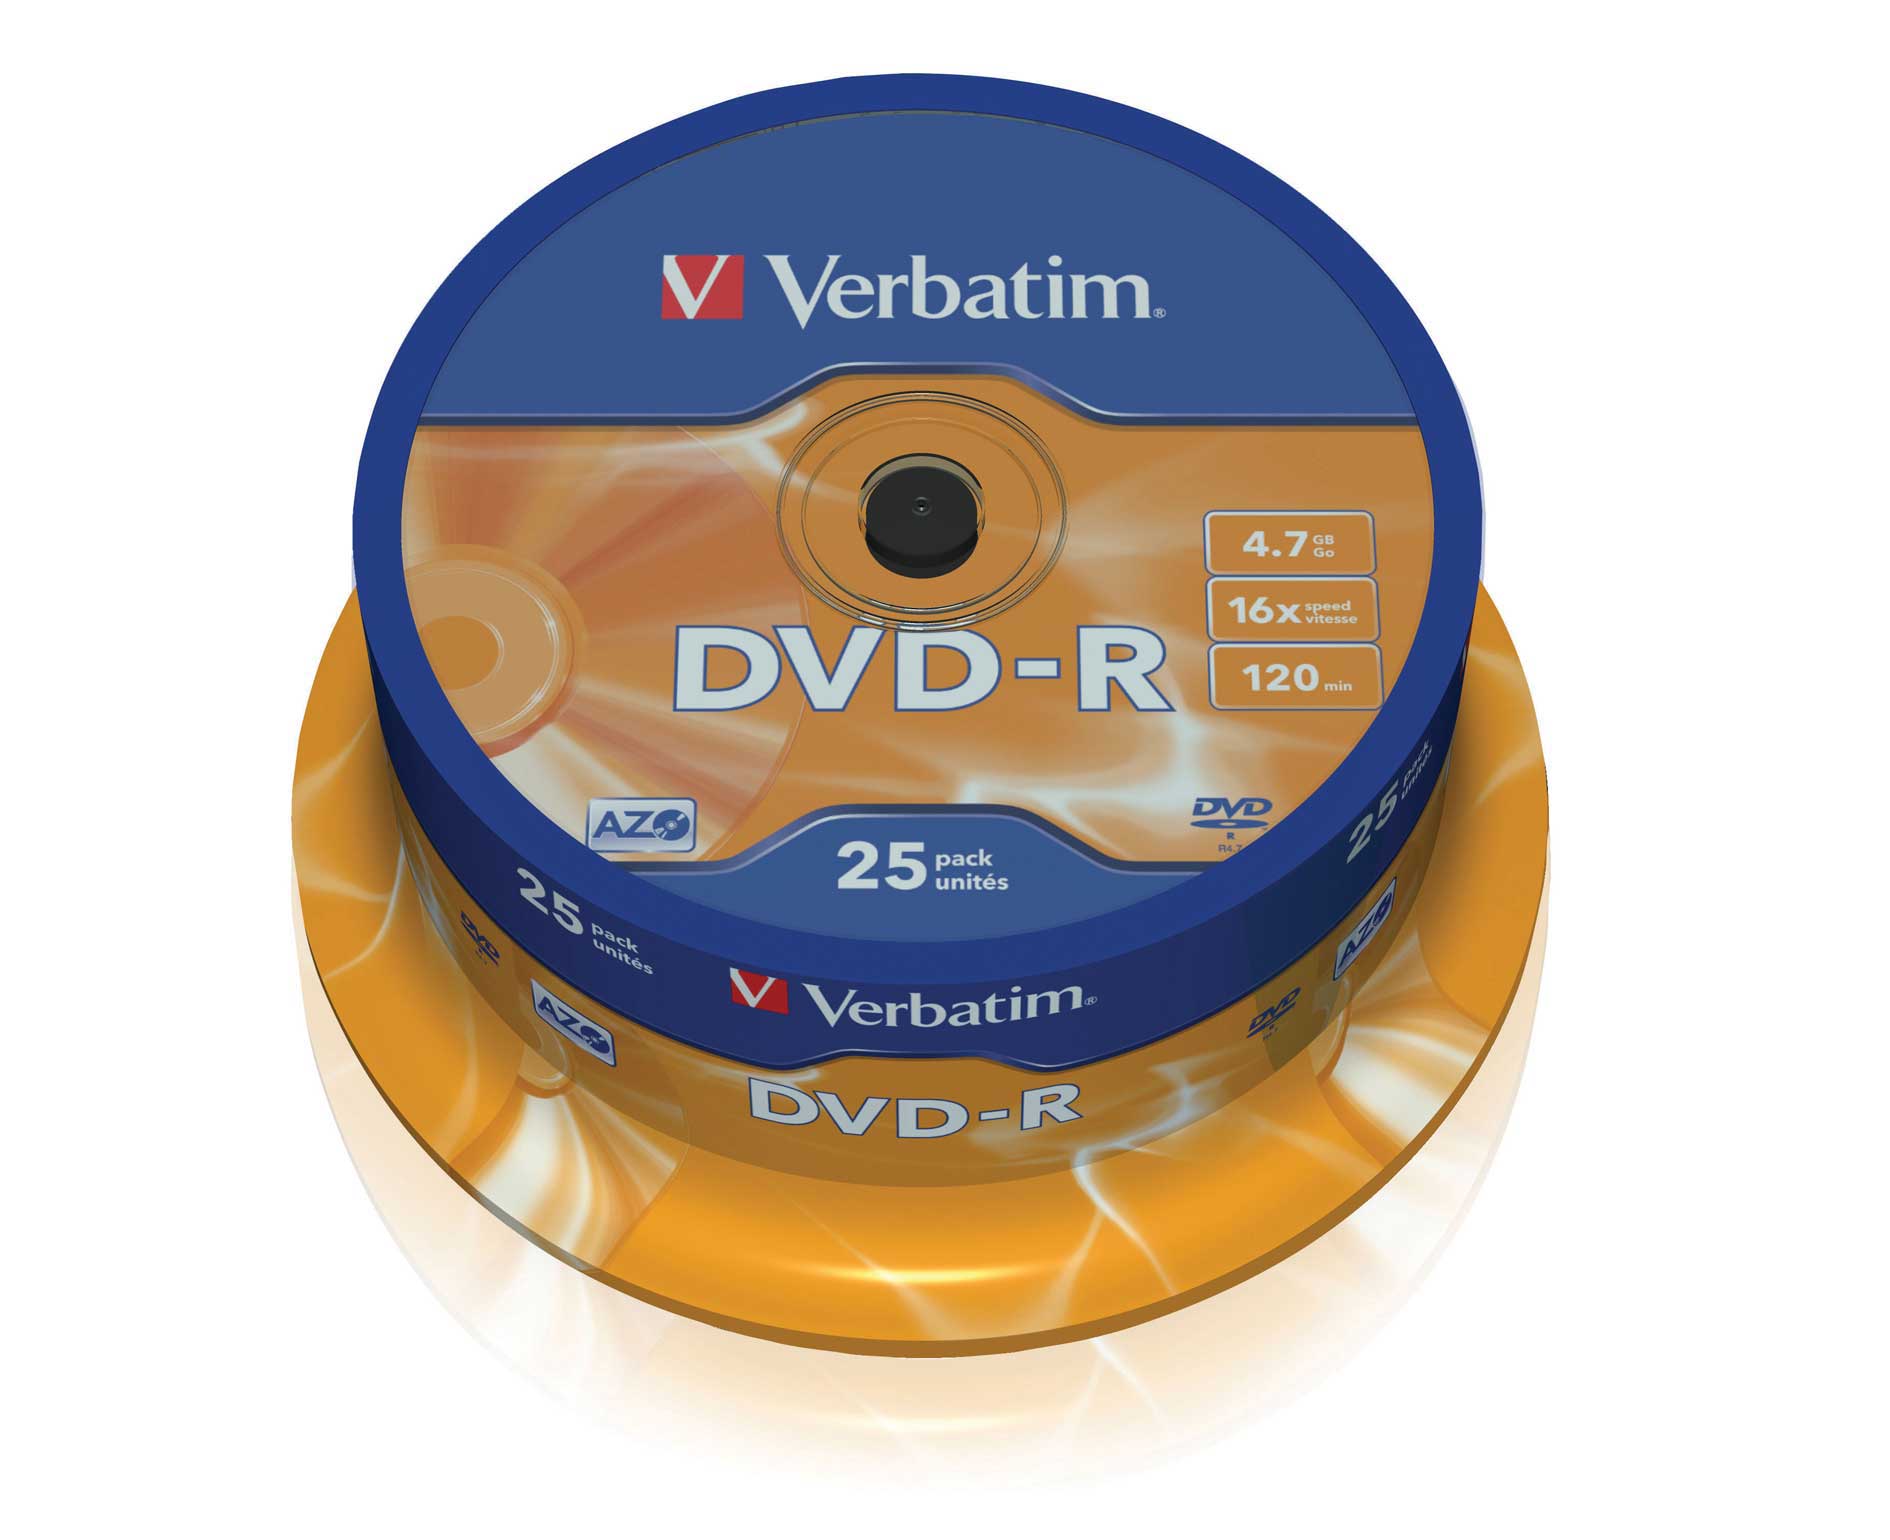 CD & DVD Storage & Cases Storage Devices Electricals & Technology ...